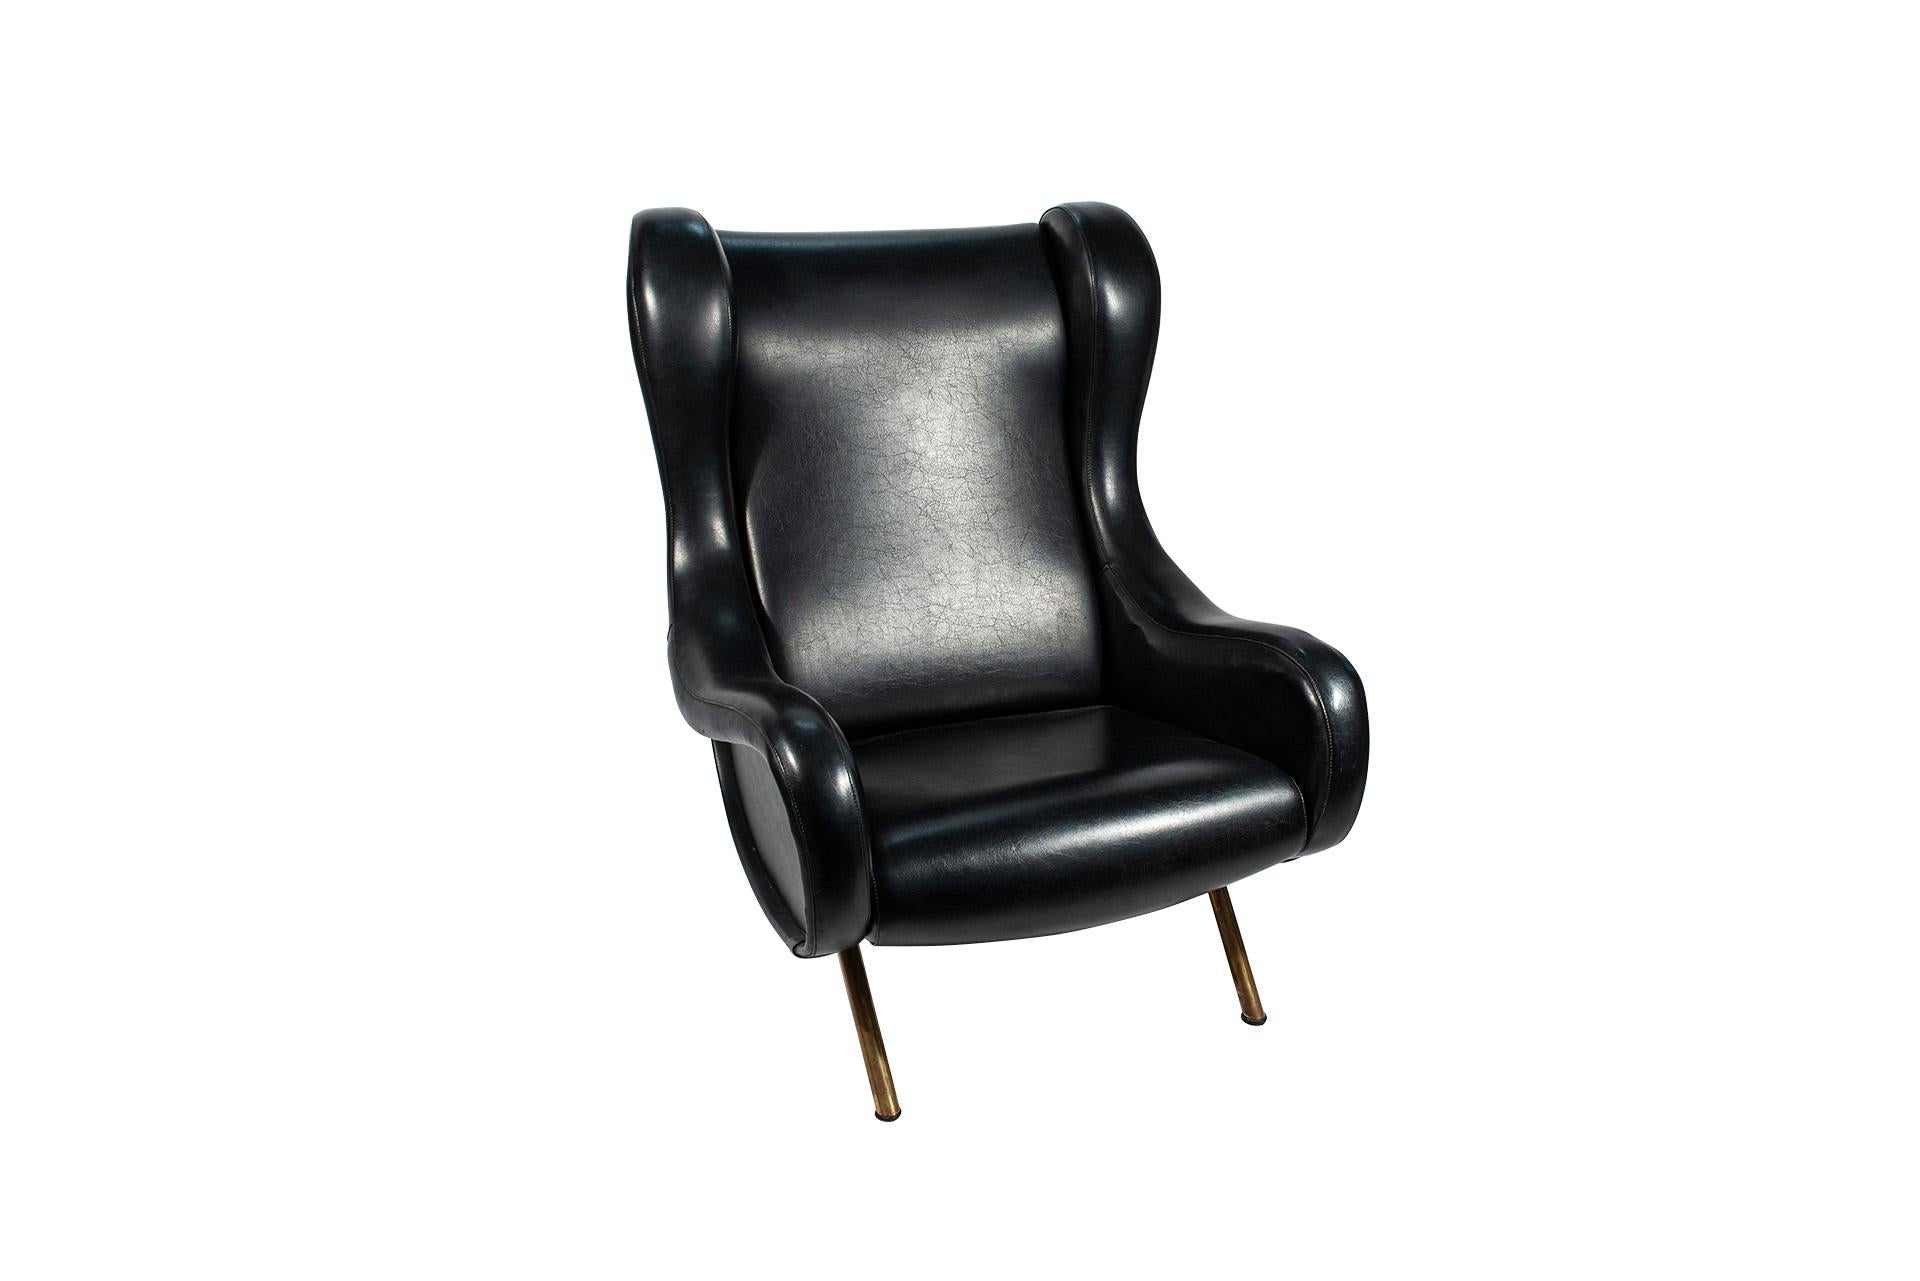 Marco Zanuso, lady armchair, 
leather, 
circa 1970, Italy.
Measures: Height 1 m, seat height 36 cm, width 72 cm, depth 80 cm.